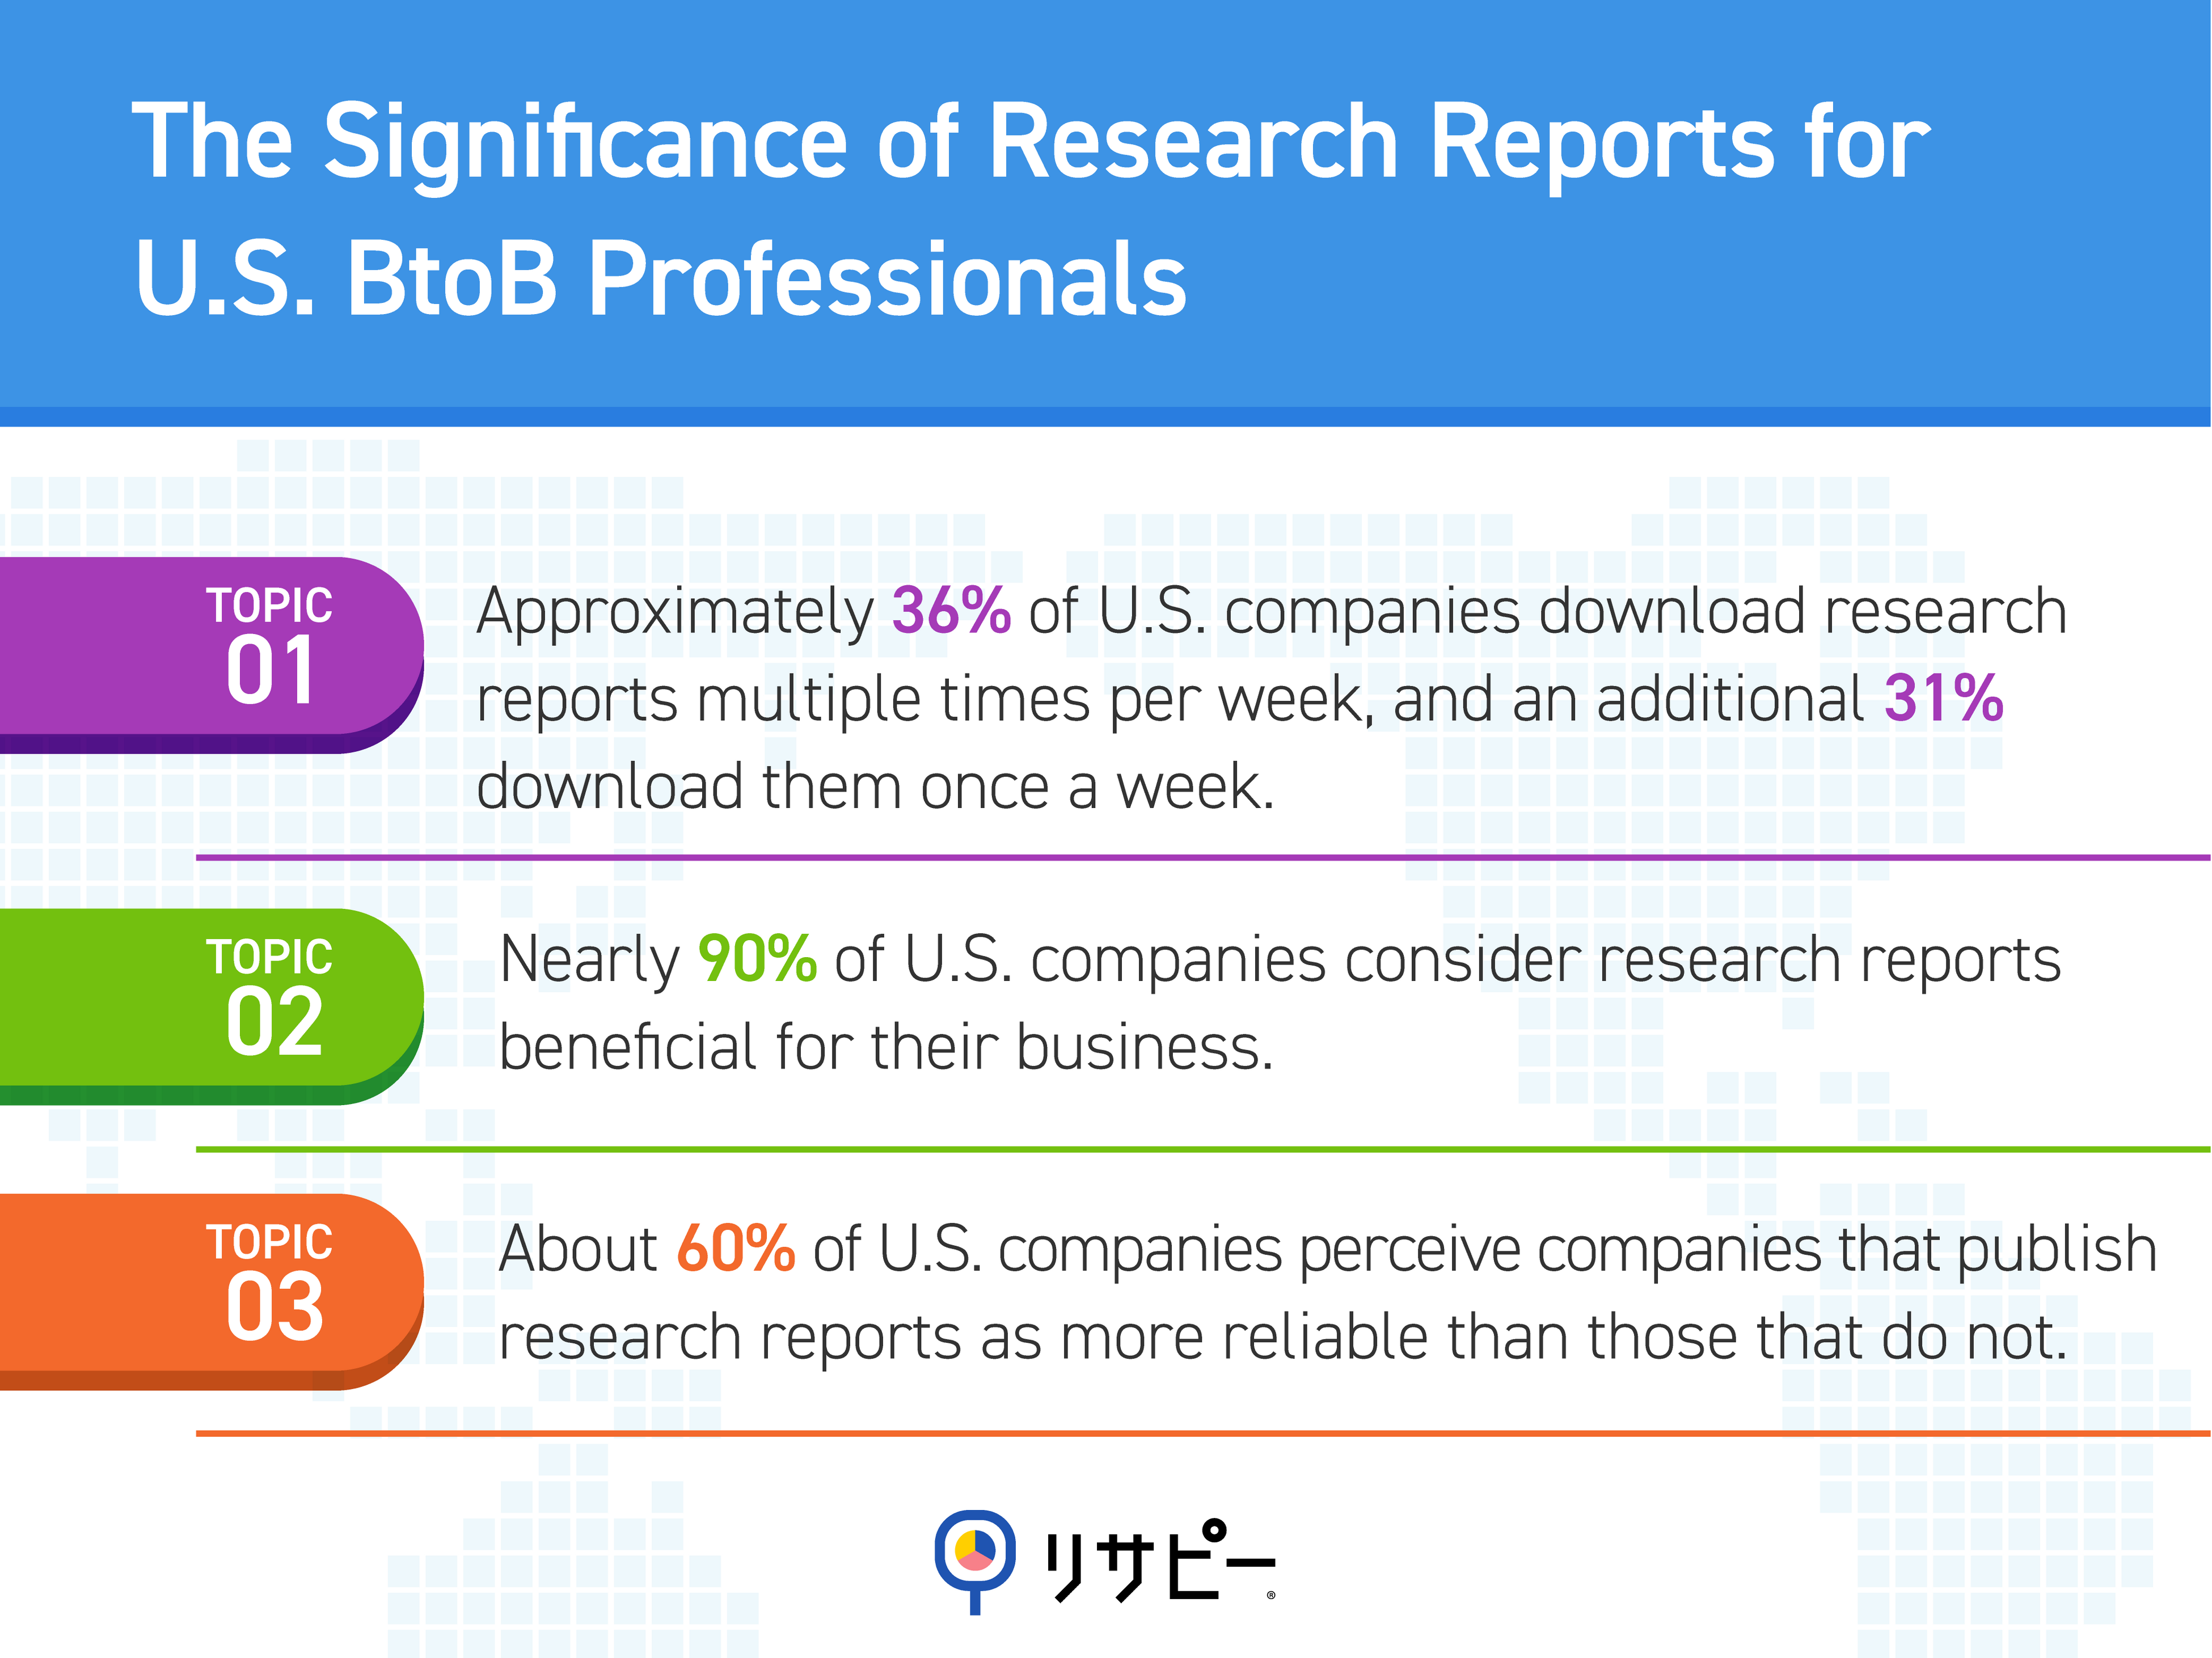 IDEATECH Survey: The Significance of Research Reports for U.S. BtoB Professionals